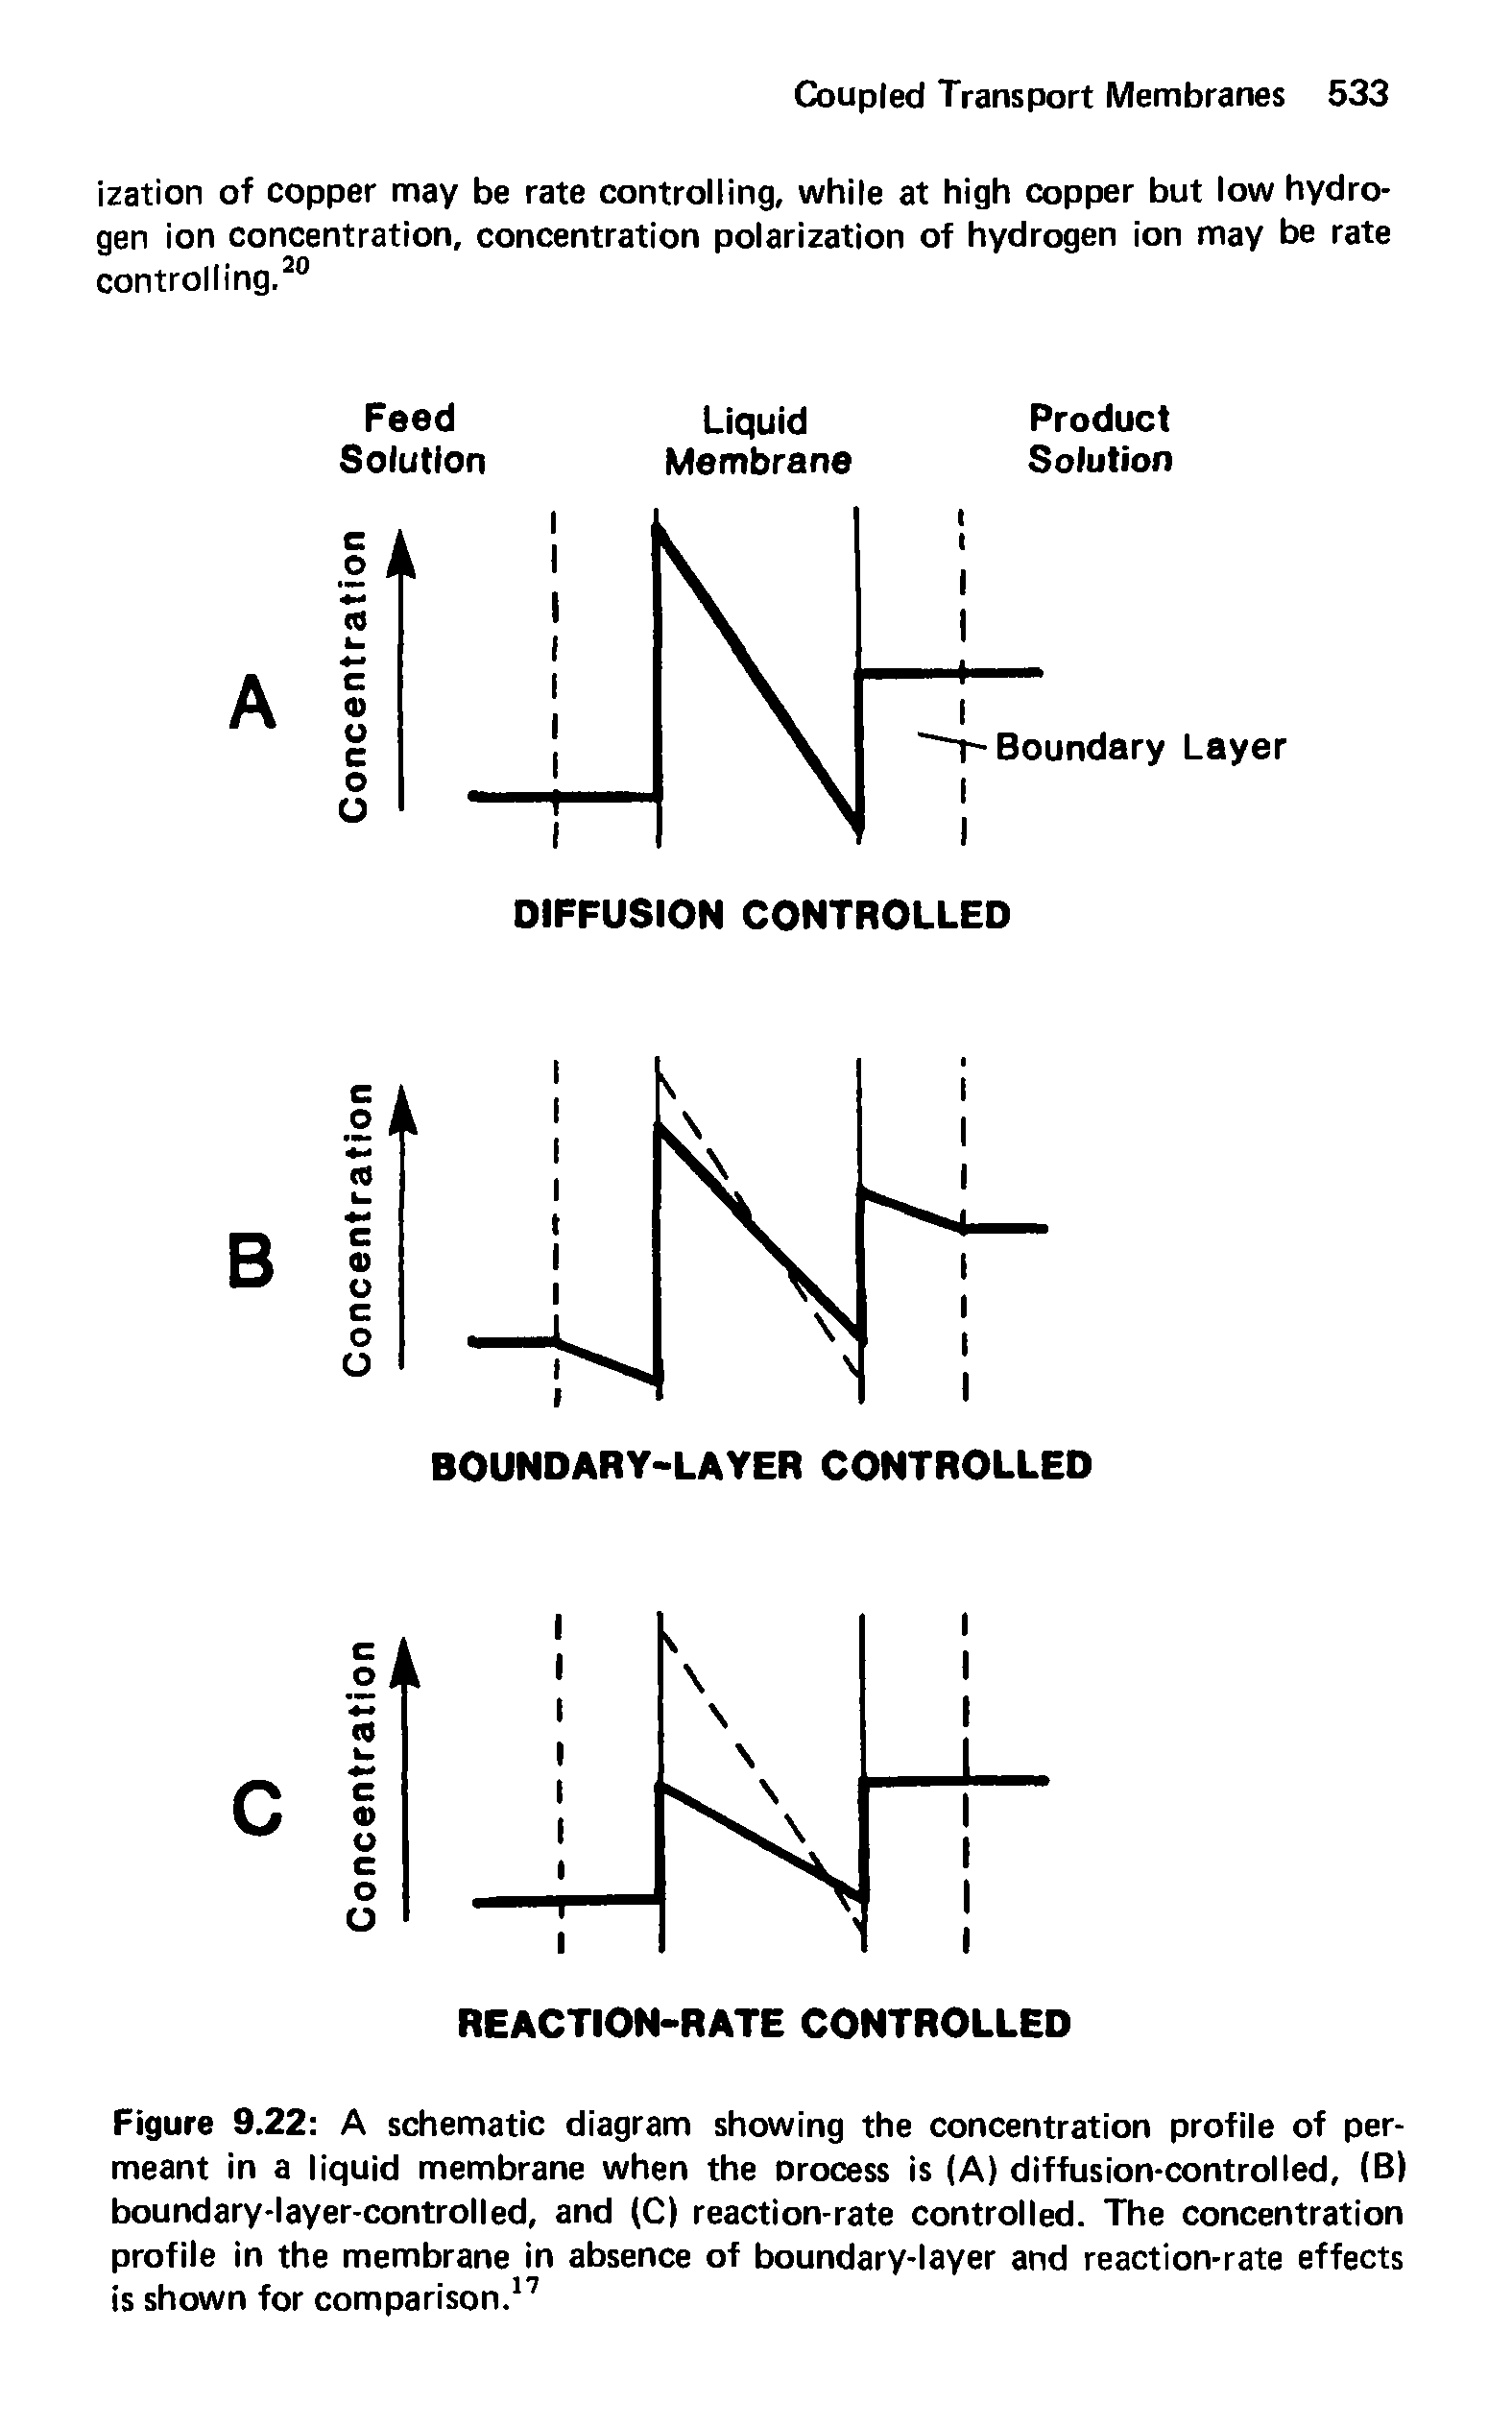 Figure 9.22 A schematic diagram showing the concentration profile of permeant in a liquid membrane when the Process is (A) diffusion-controlled, (B) boundary-layer-controlled, and (C) reaction-rate controlled. The concentration profile in the membrane in absence of boundary-layer and reaction-rate effects is shown for comparison.17...